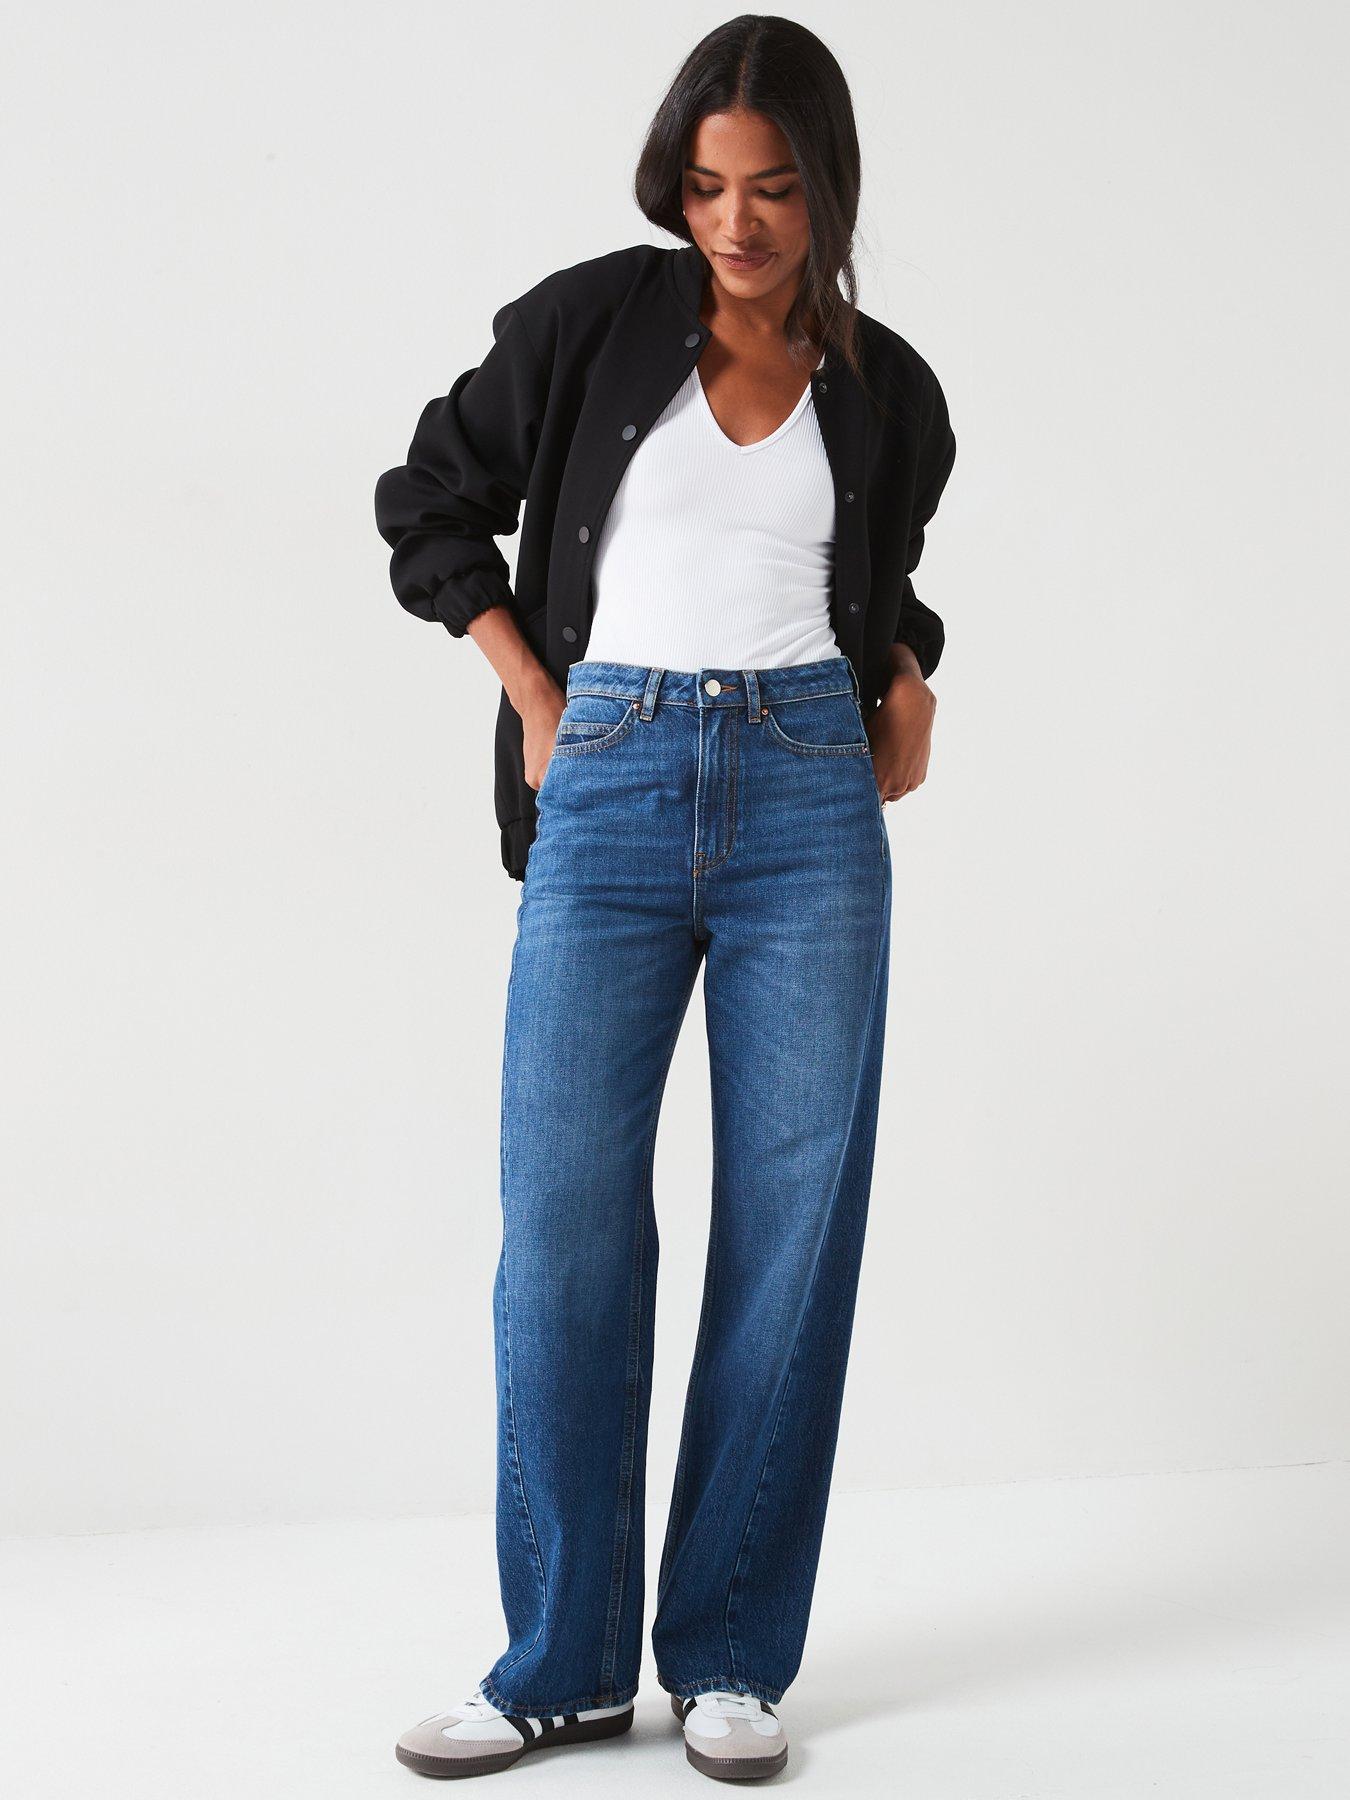 V by Very Displaced Seam Wide Leg Jeans - Dark Wash Blue | Very.co.uk